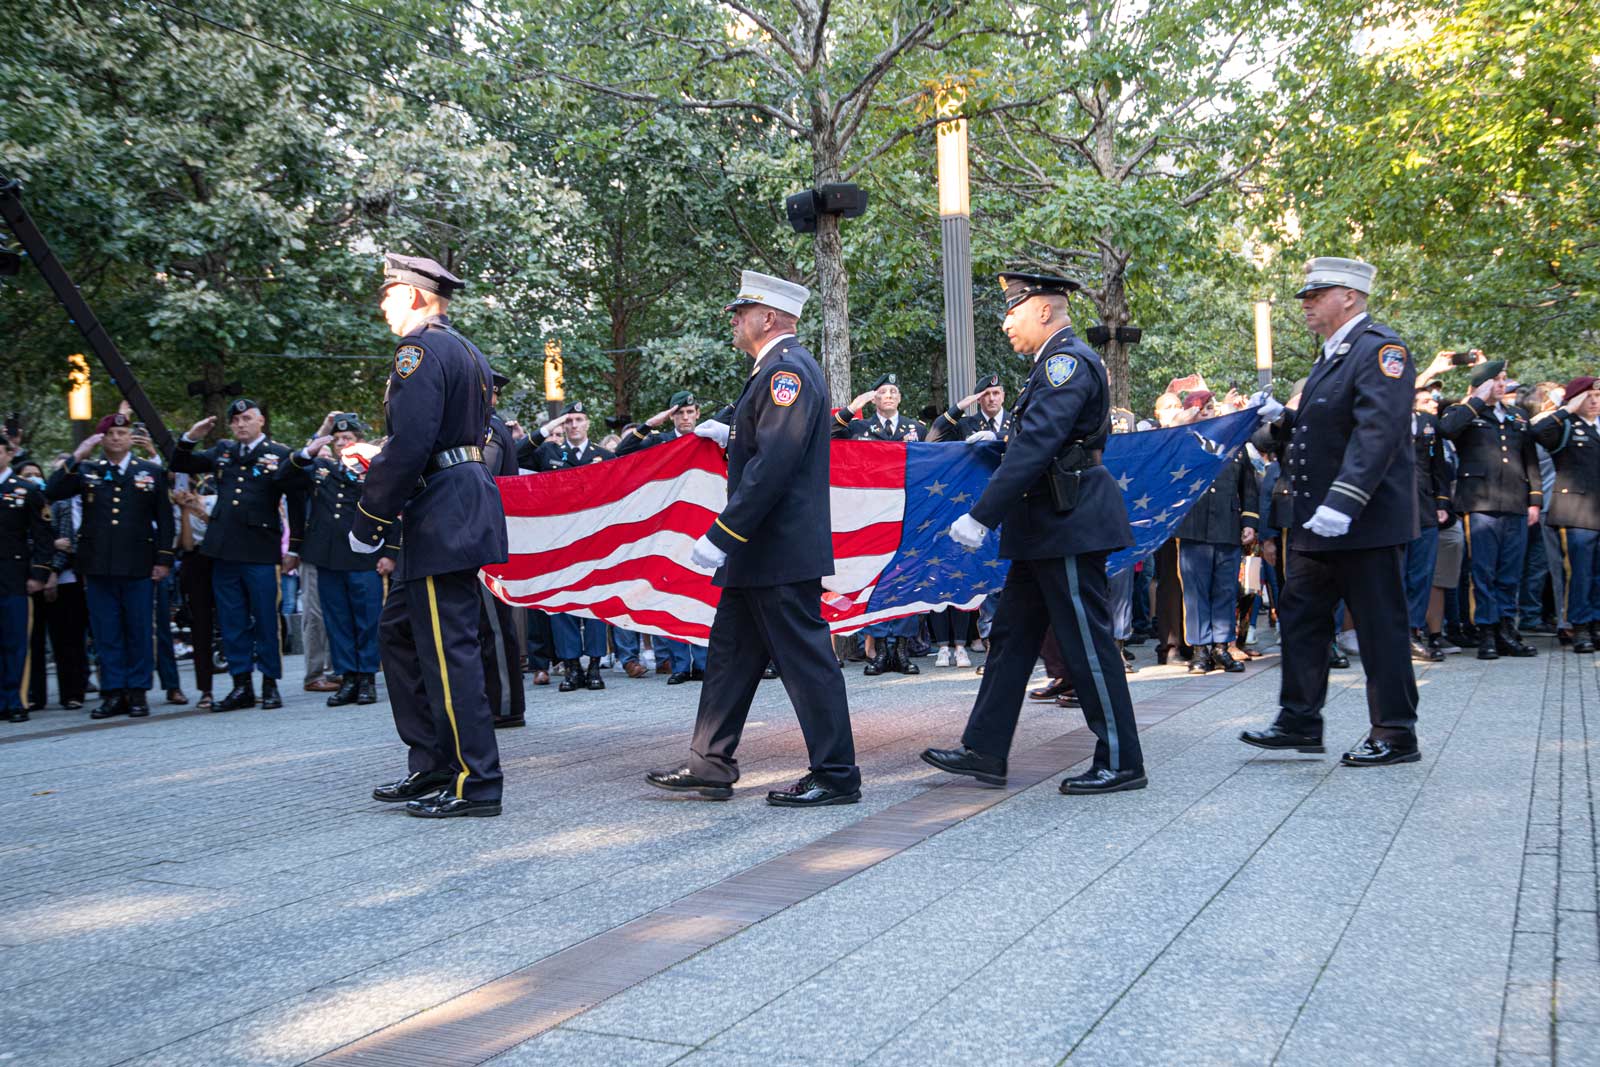 FDNY and NYPD open 9/11 ceremony carrying US flag